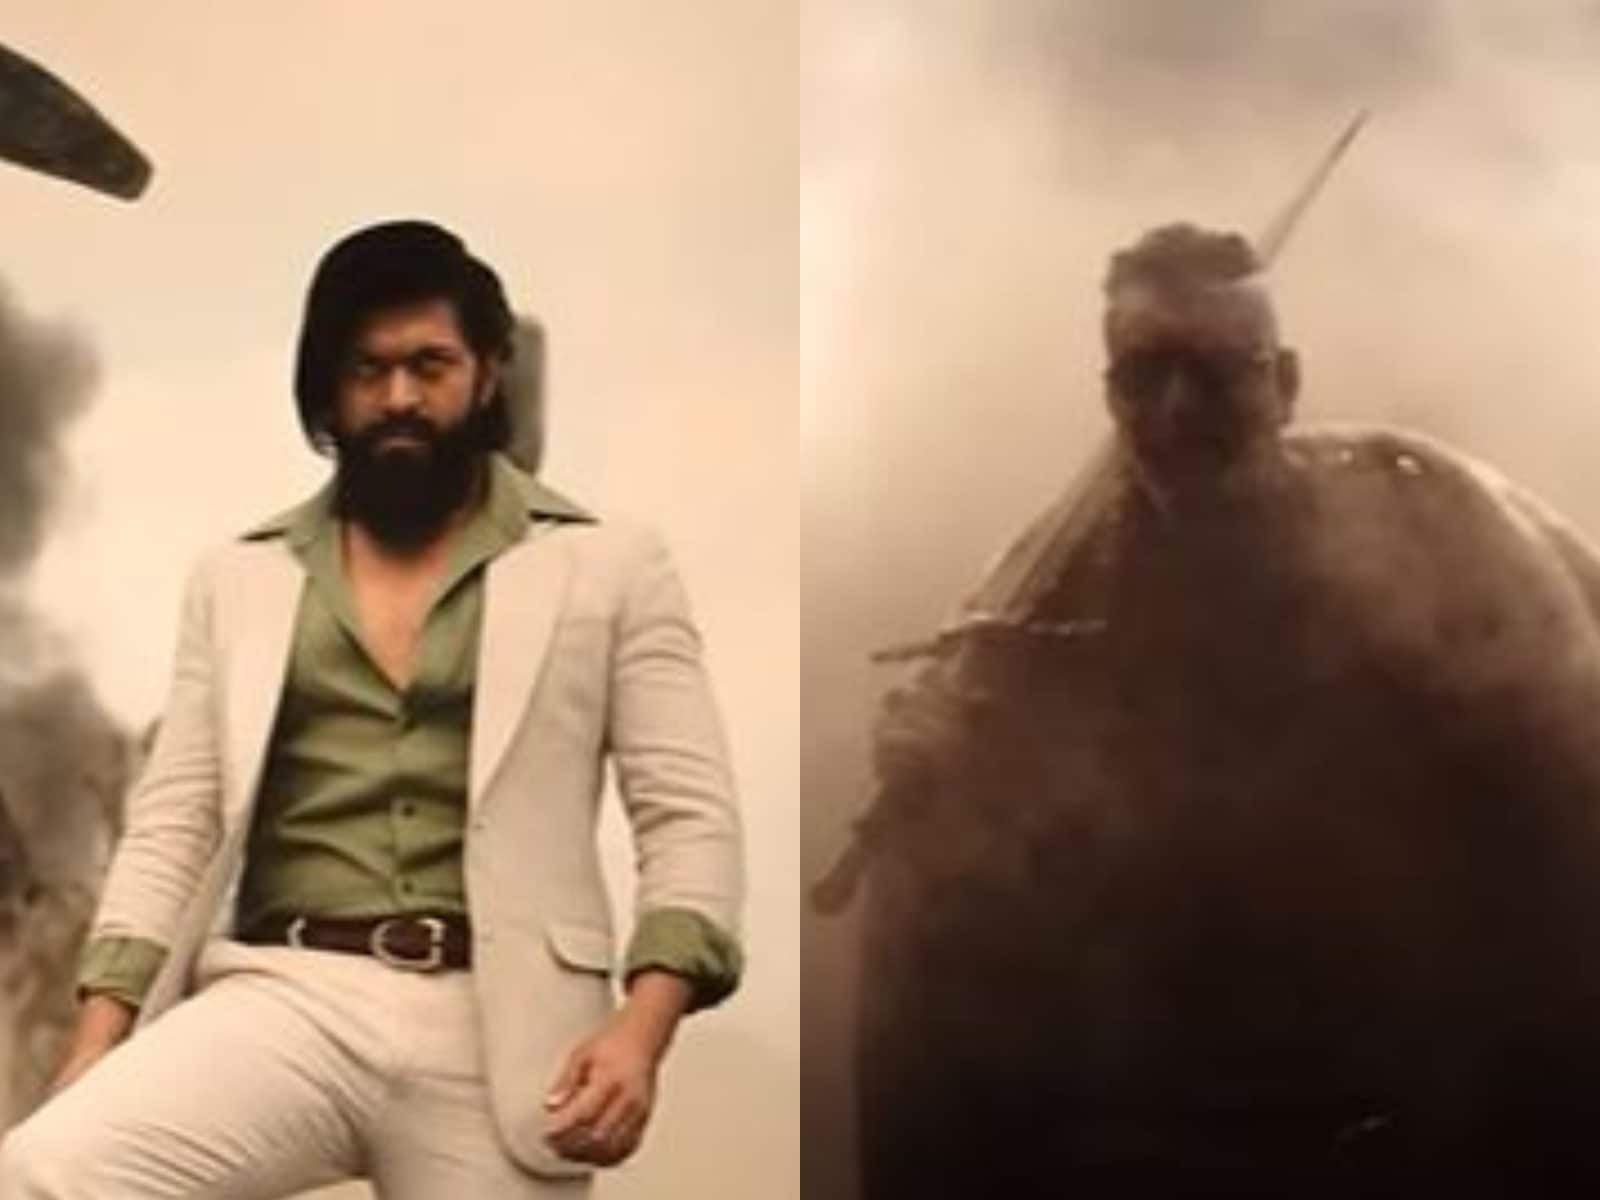 How to watch KGF 2 - Movies and Music. - Quora